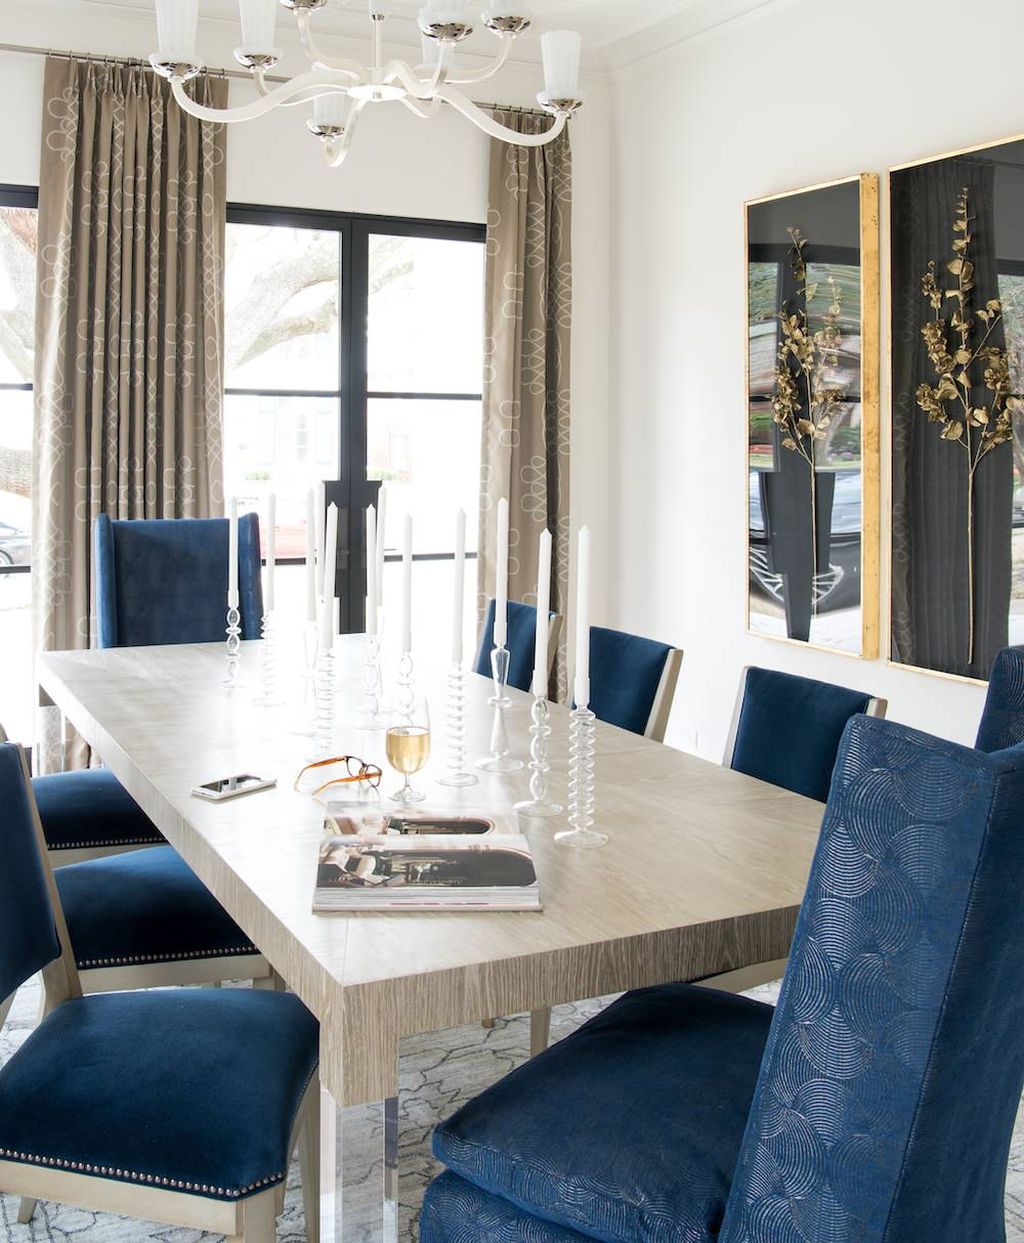 Luxurious-Interiors-of-Highland-Park-Beauty-by-Traci-Connell-Interiors-22